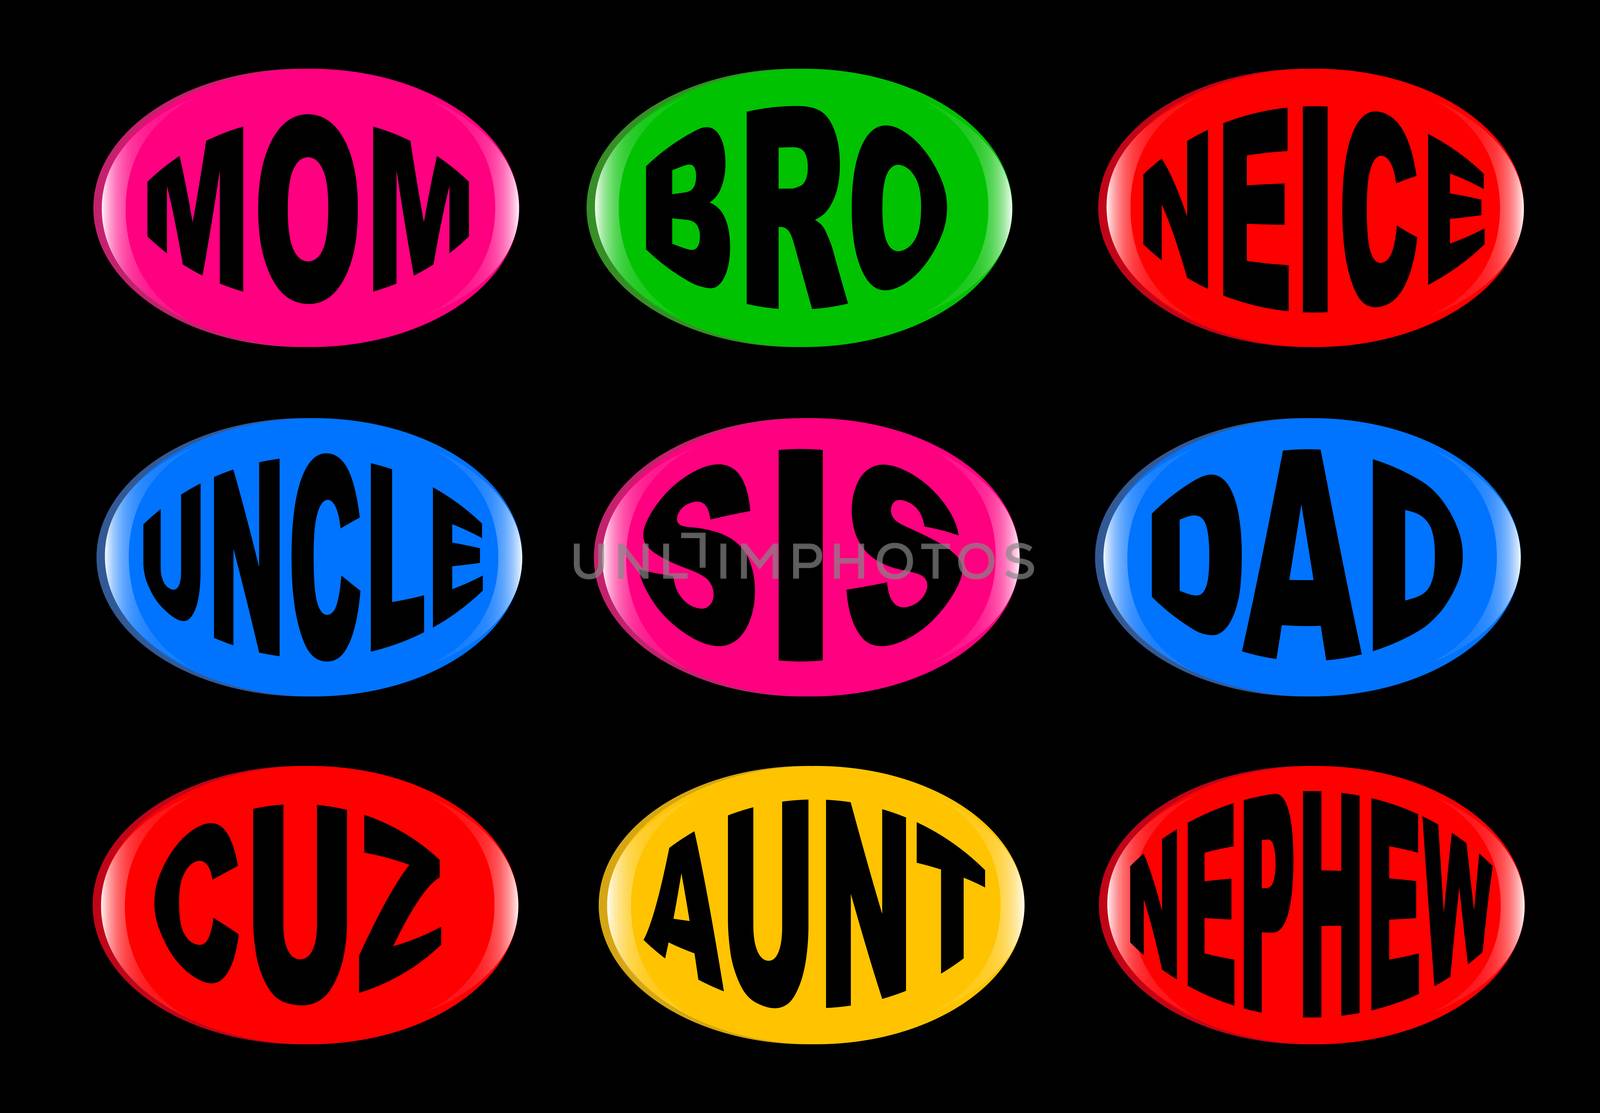 A collection of family 3D buttons with various text instructions. Easy color change and resize.